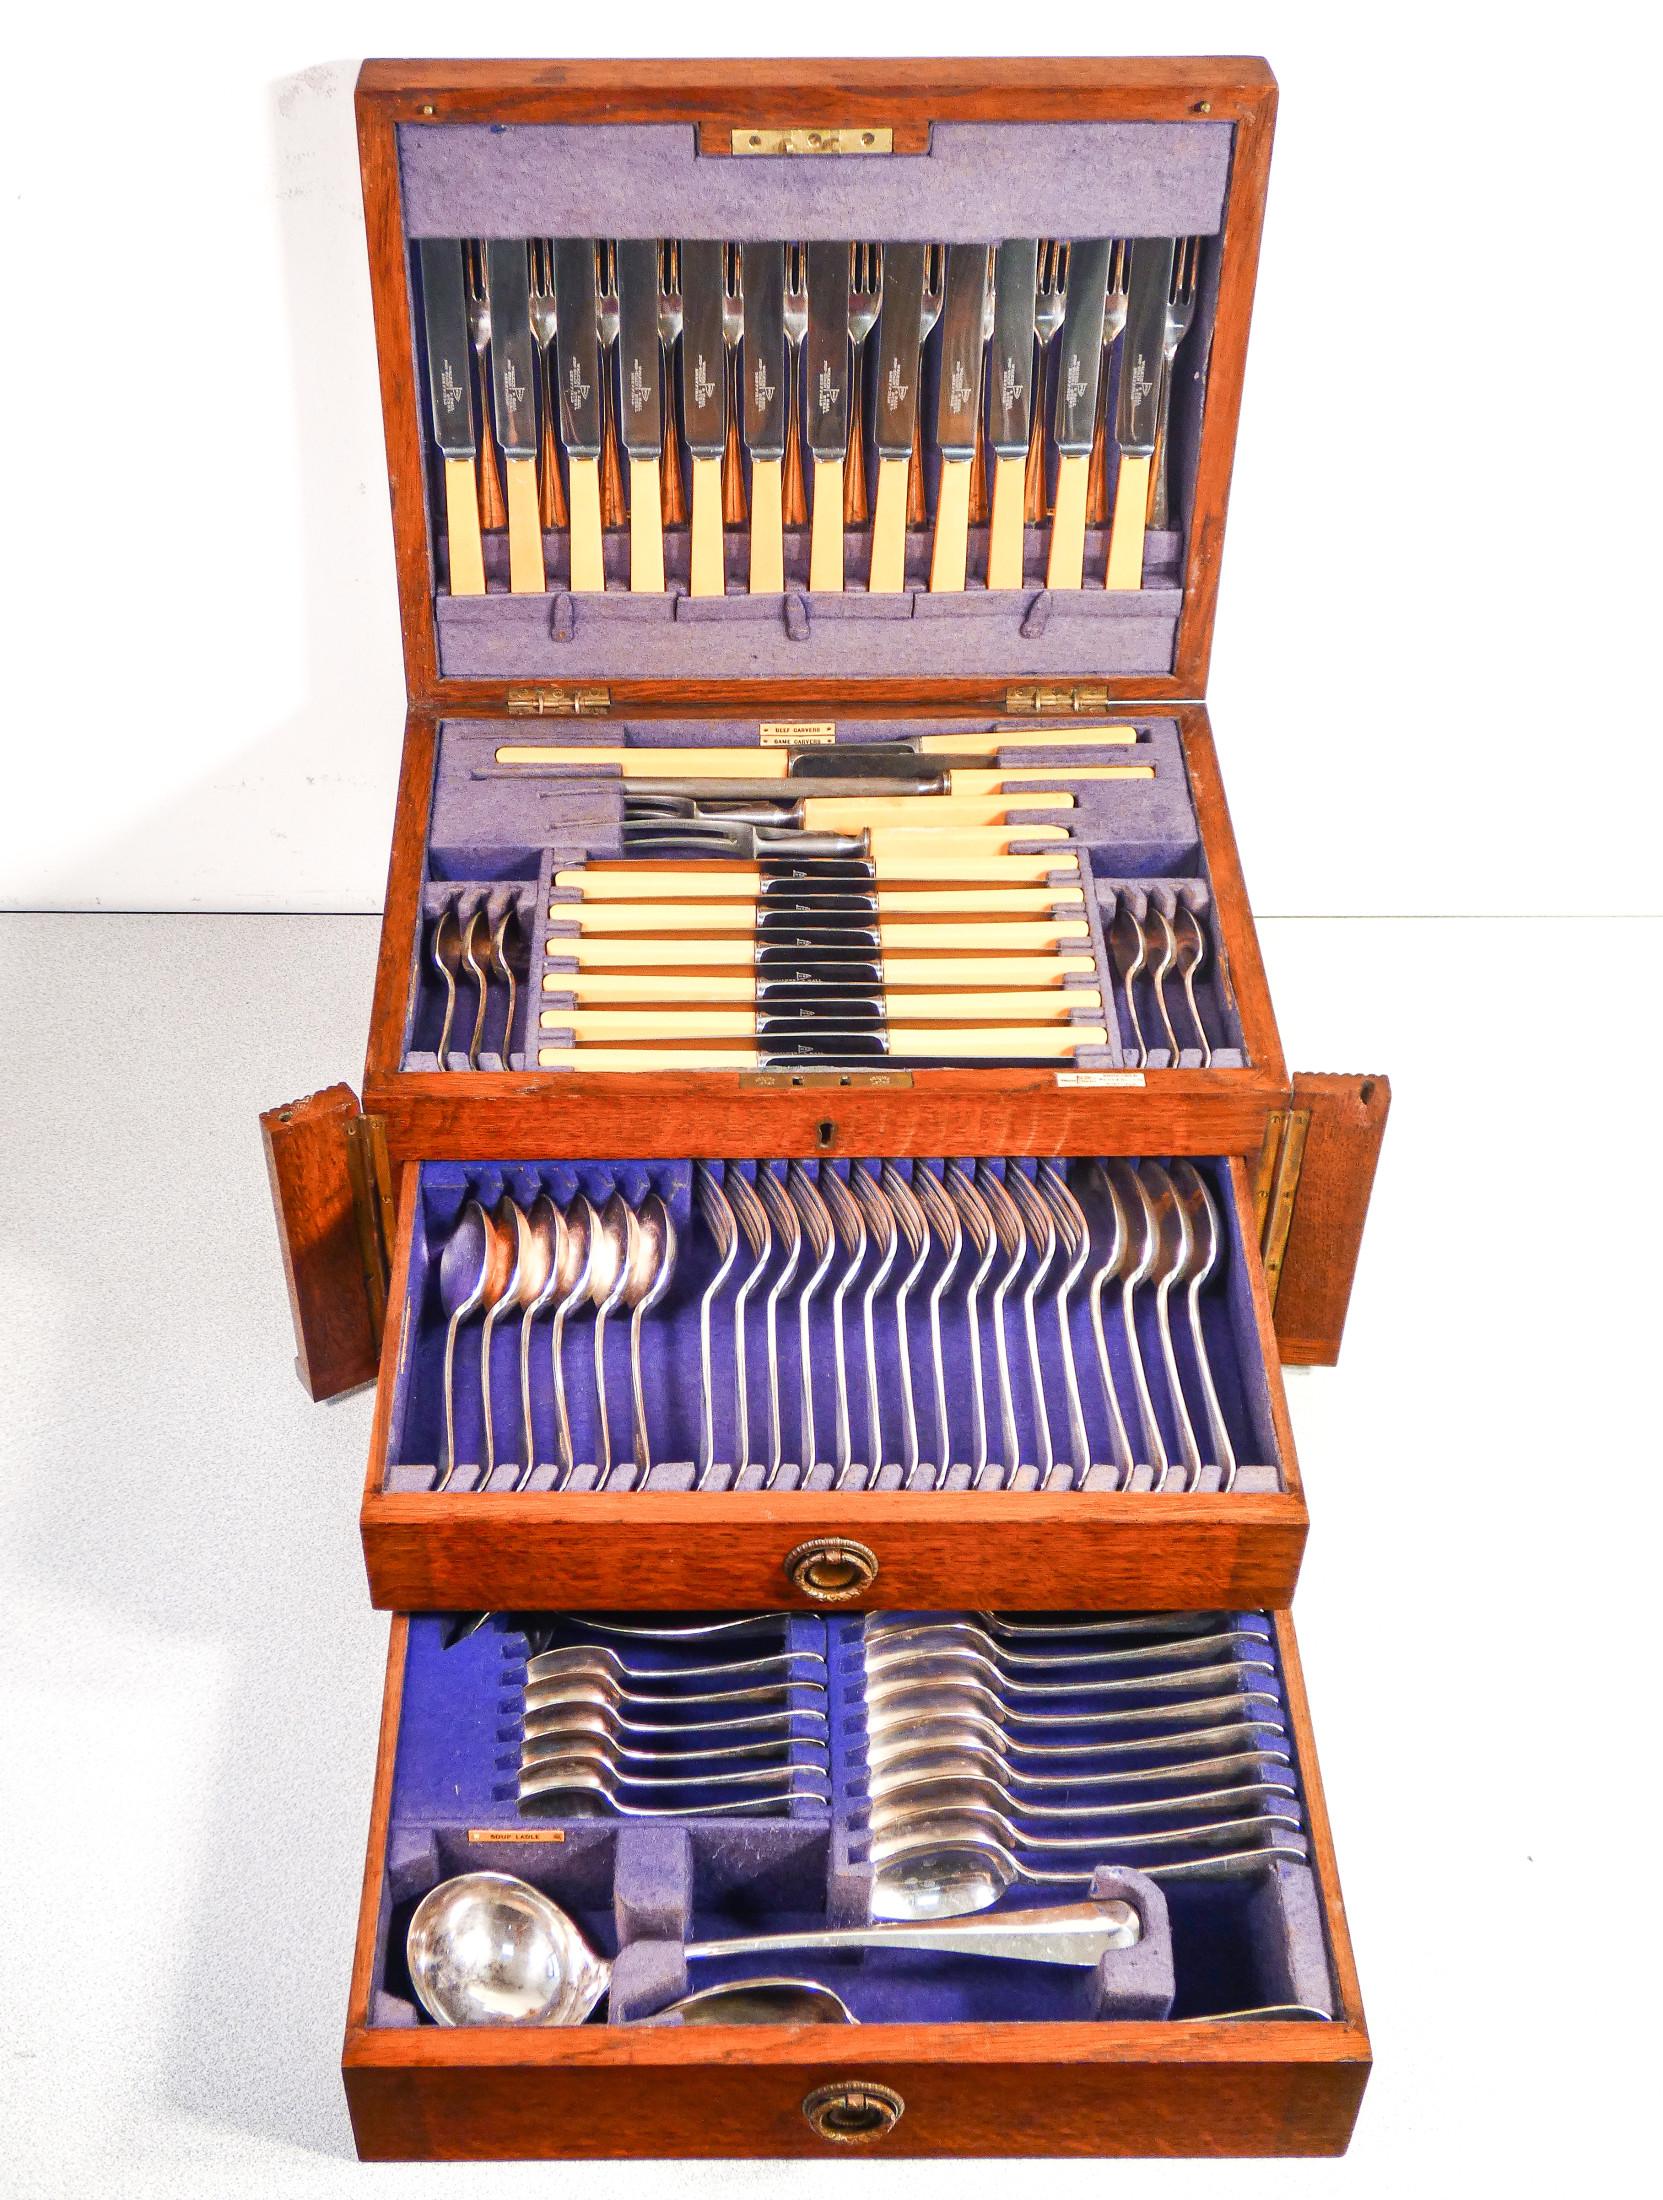 WALKER & HALL Ltd.
Cutlery set for 12 people
Consisting of 92 pieces,
in elegant oak case

ORIGIN
Sheffield

PERIOD
1920s

BRAND
Manufactured by
WALKER & HALL Ltd
Sheffield

MATERIALS
Sheffield and stainless